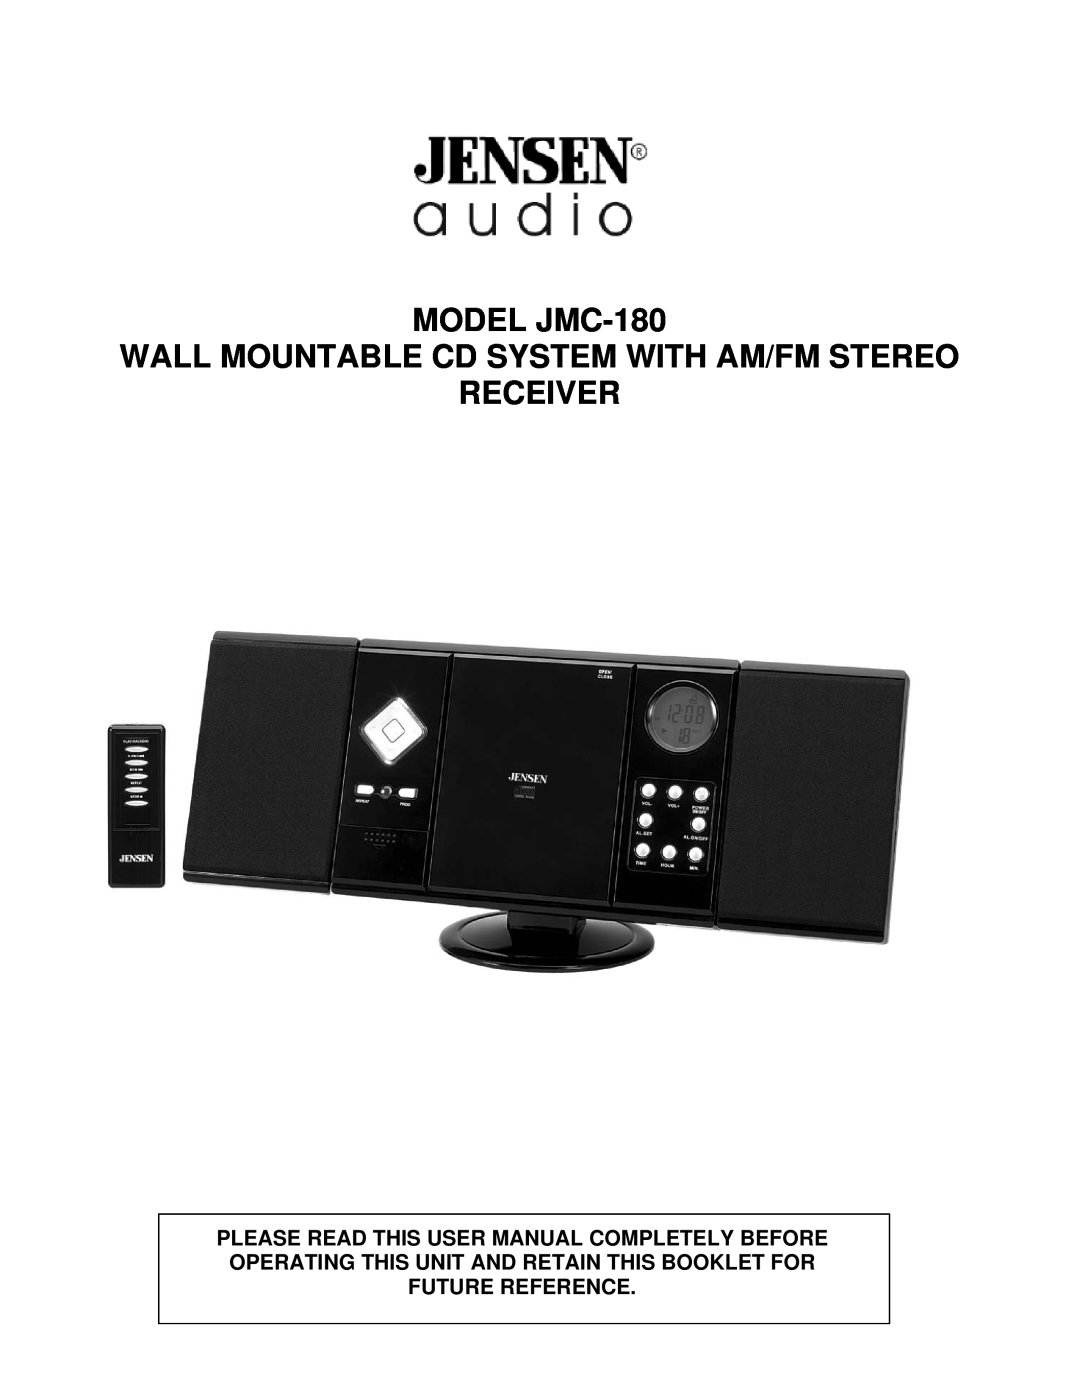 Jensen user manual MODEL JMC-180, Wall Mountable Cd System With Am/Fm Stereo, Receiver, Future Reference 